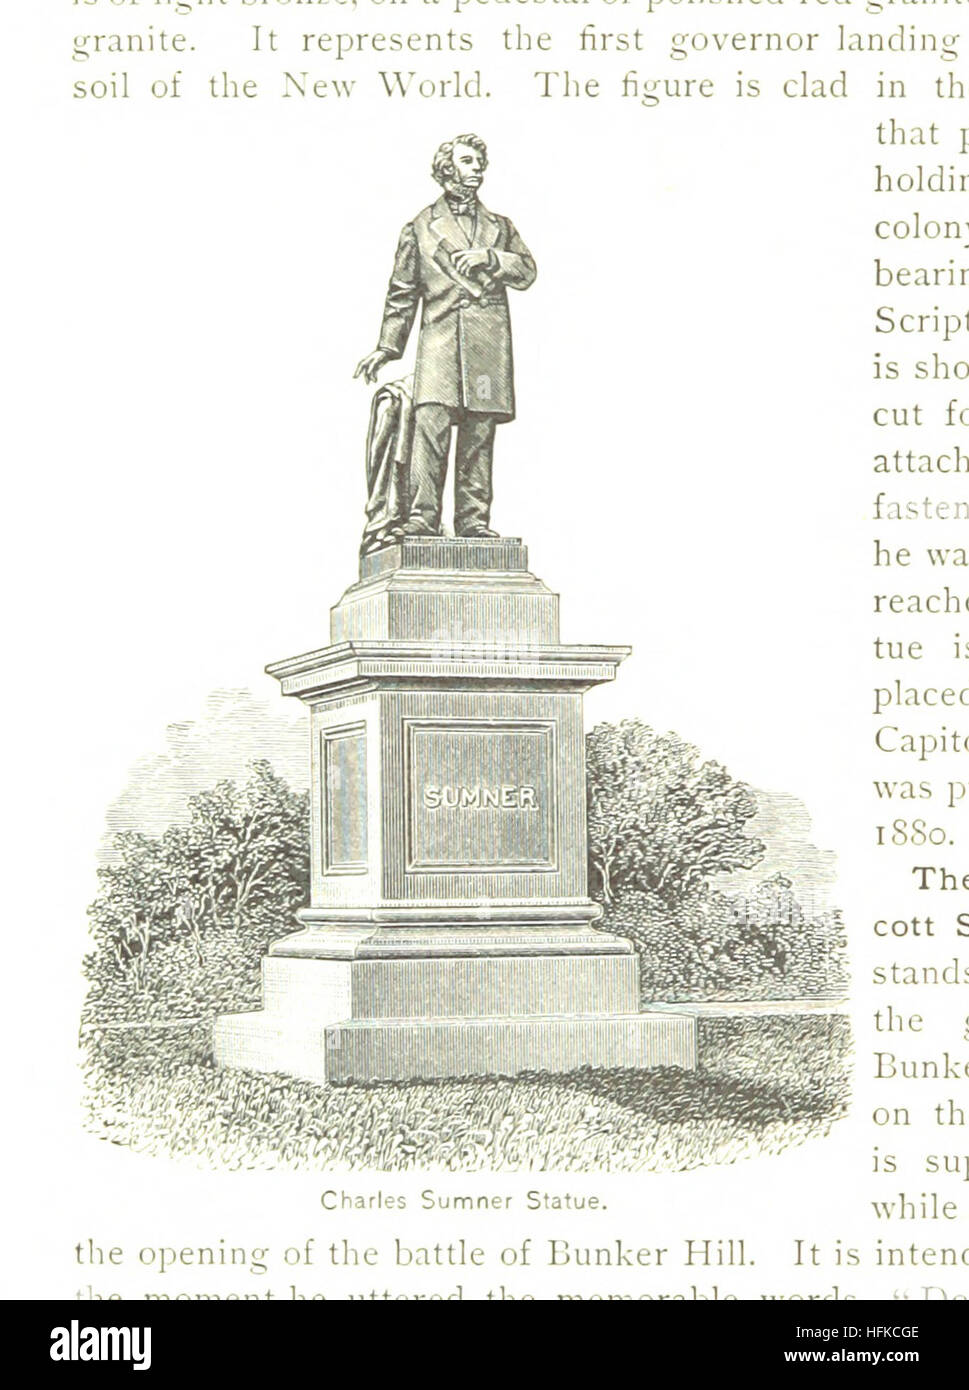 King's Hand-book of Boston ... Fifth edition, etc Image taken from page 120 of 'King's Hand-book of Boston Stock Photo